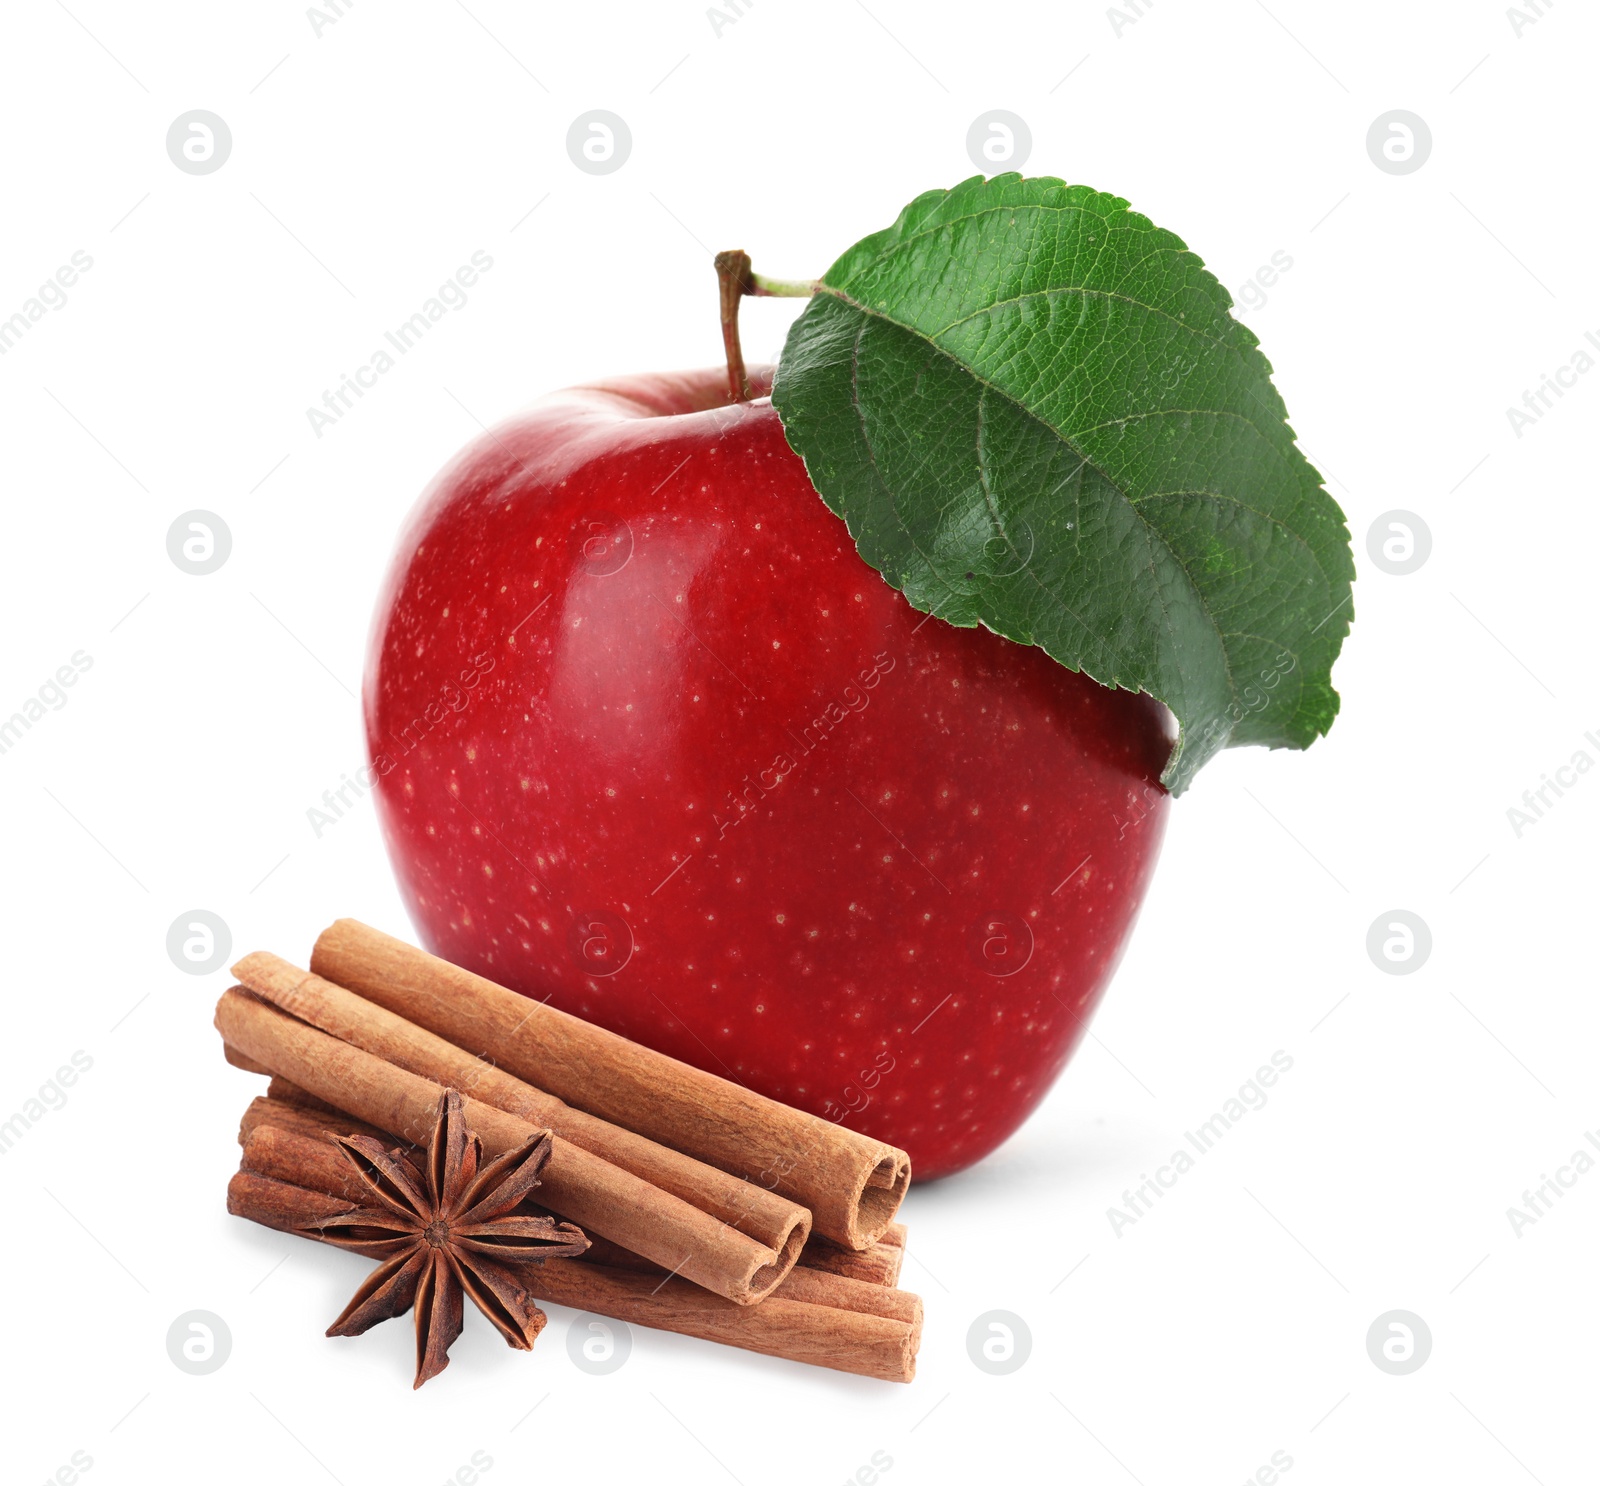 Image of Aromatic cinnamon sticks, anise star and red apple isolated on white